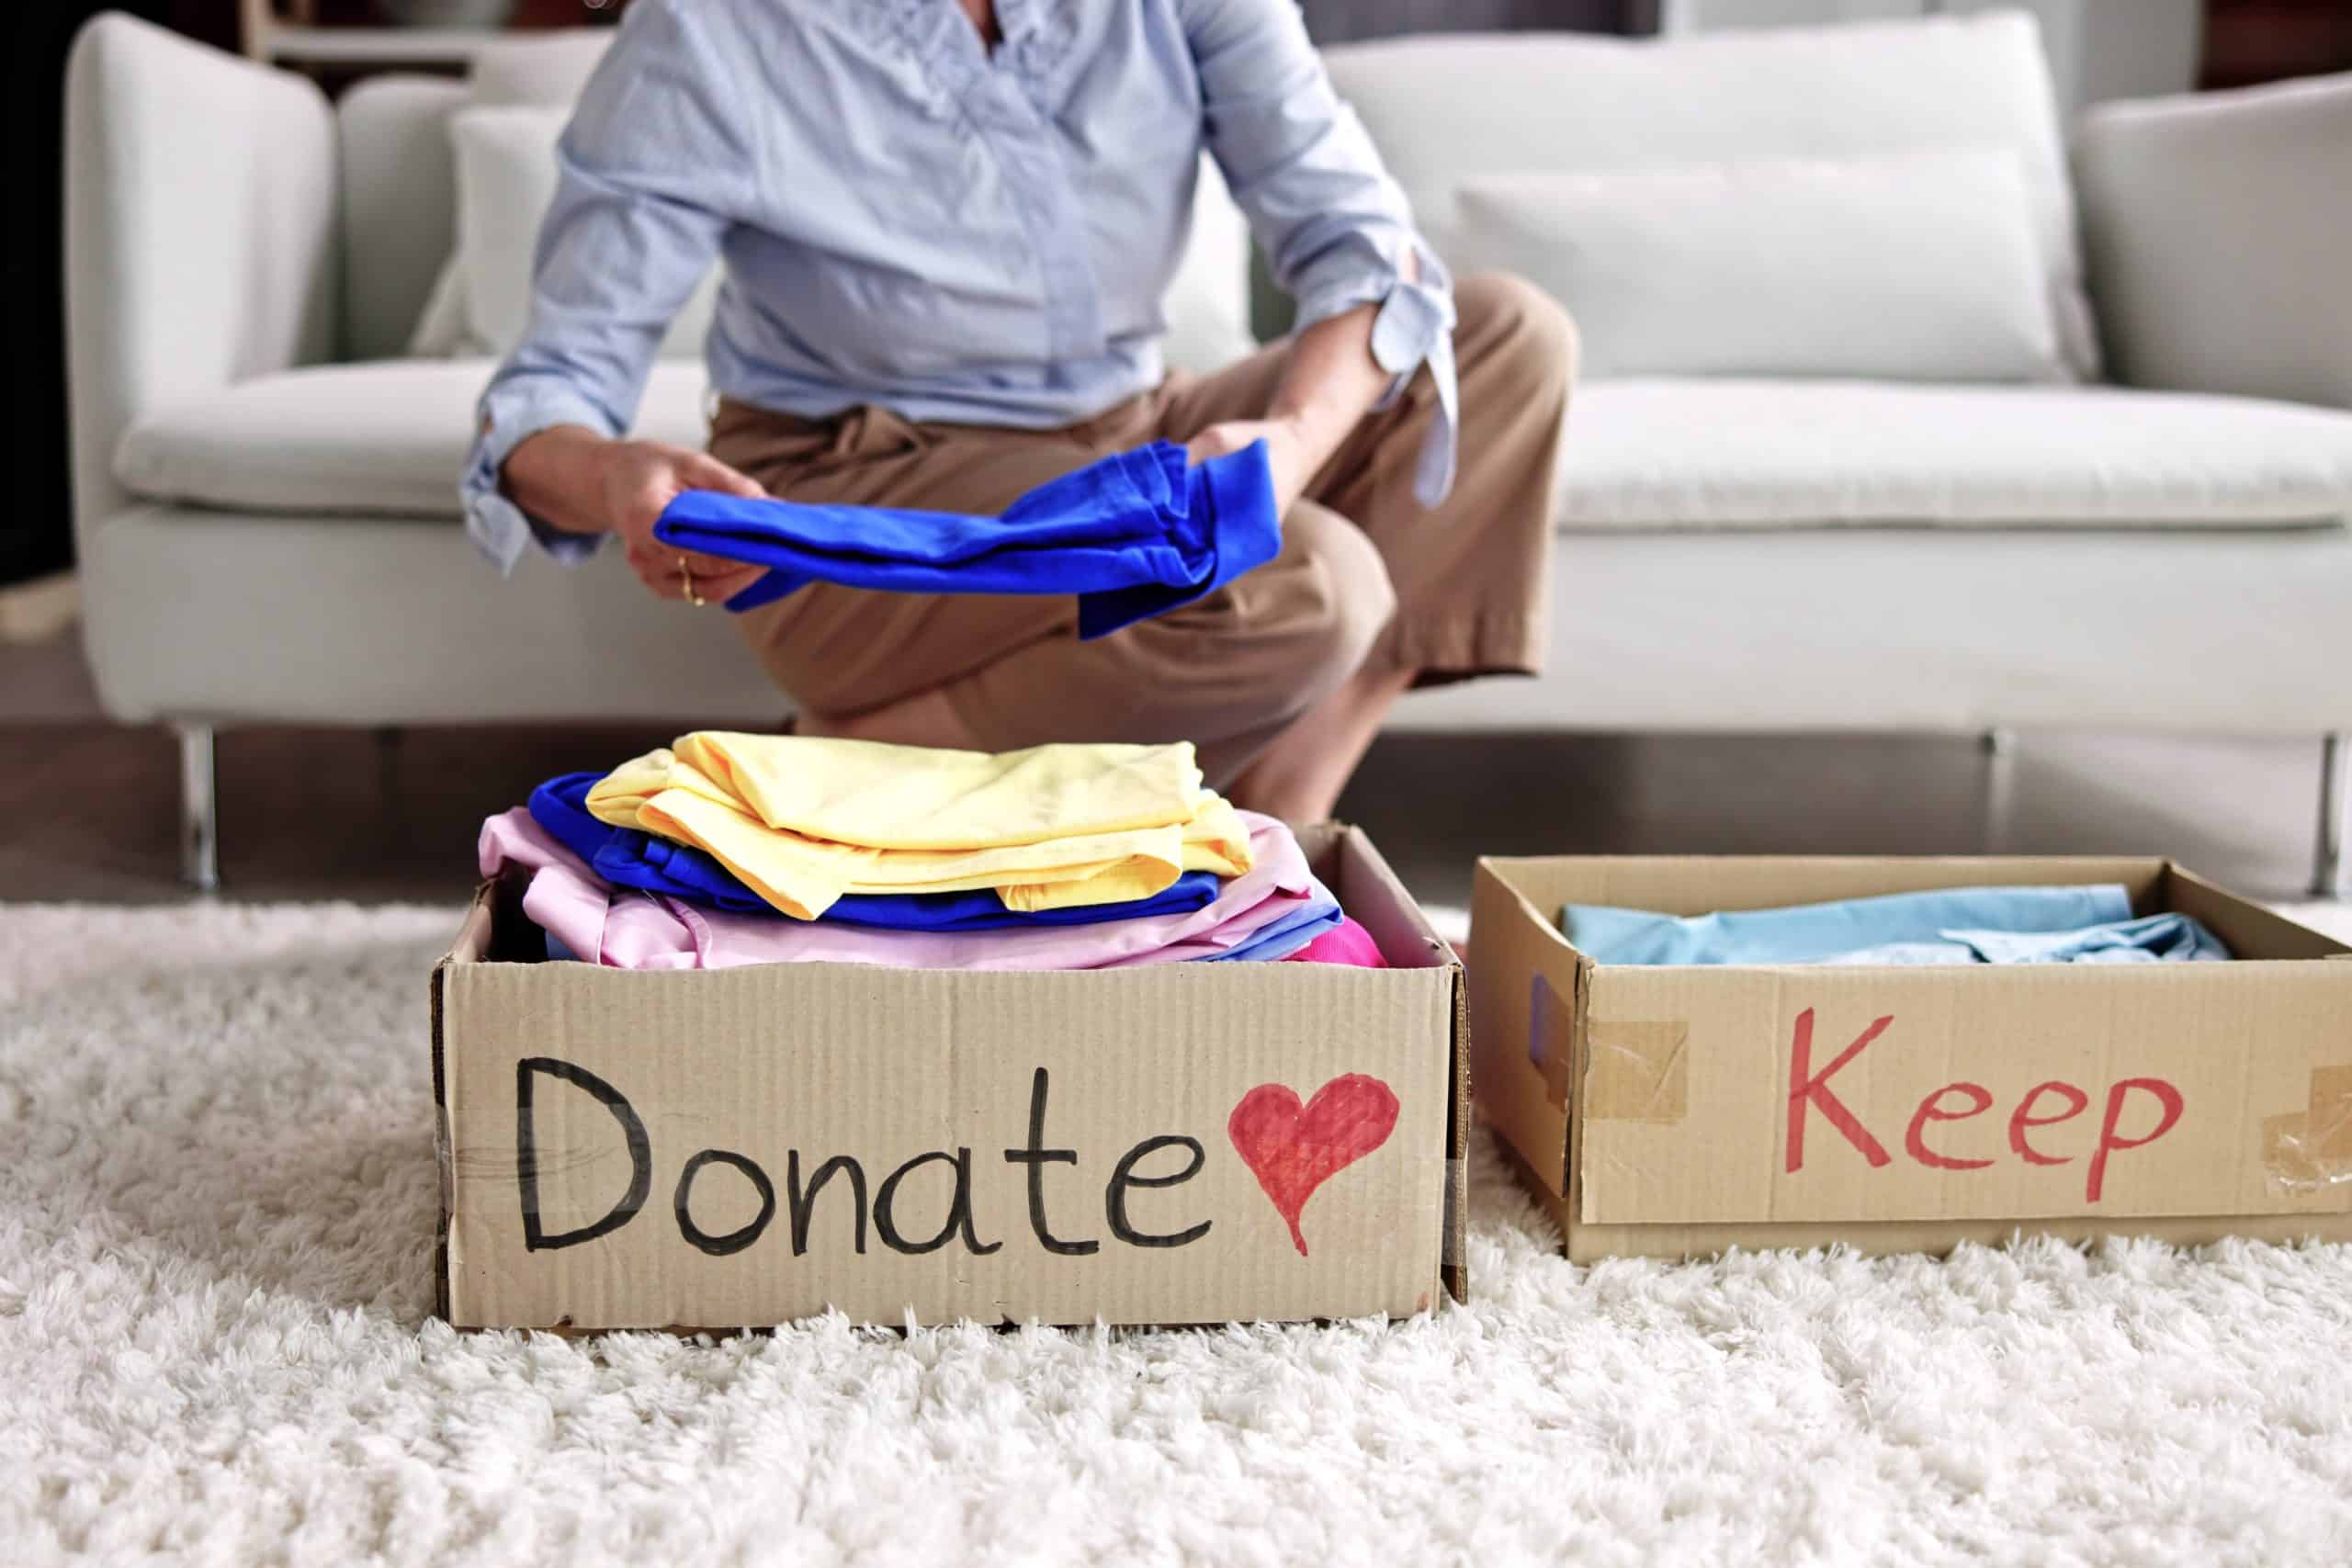 Decluttering your home - image shows a person putting a blue t-shirt into a cardboard box labelled 'Donate' and another cardboard box alongside is labelled 'Keep'